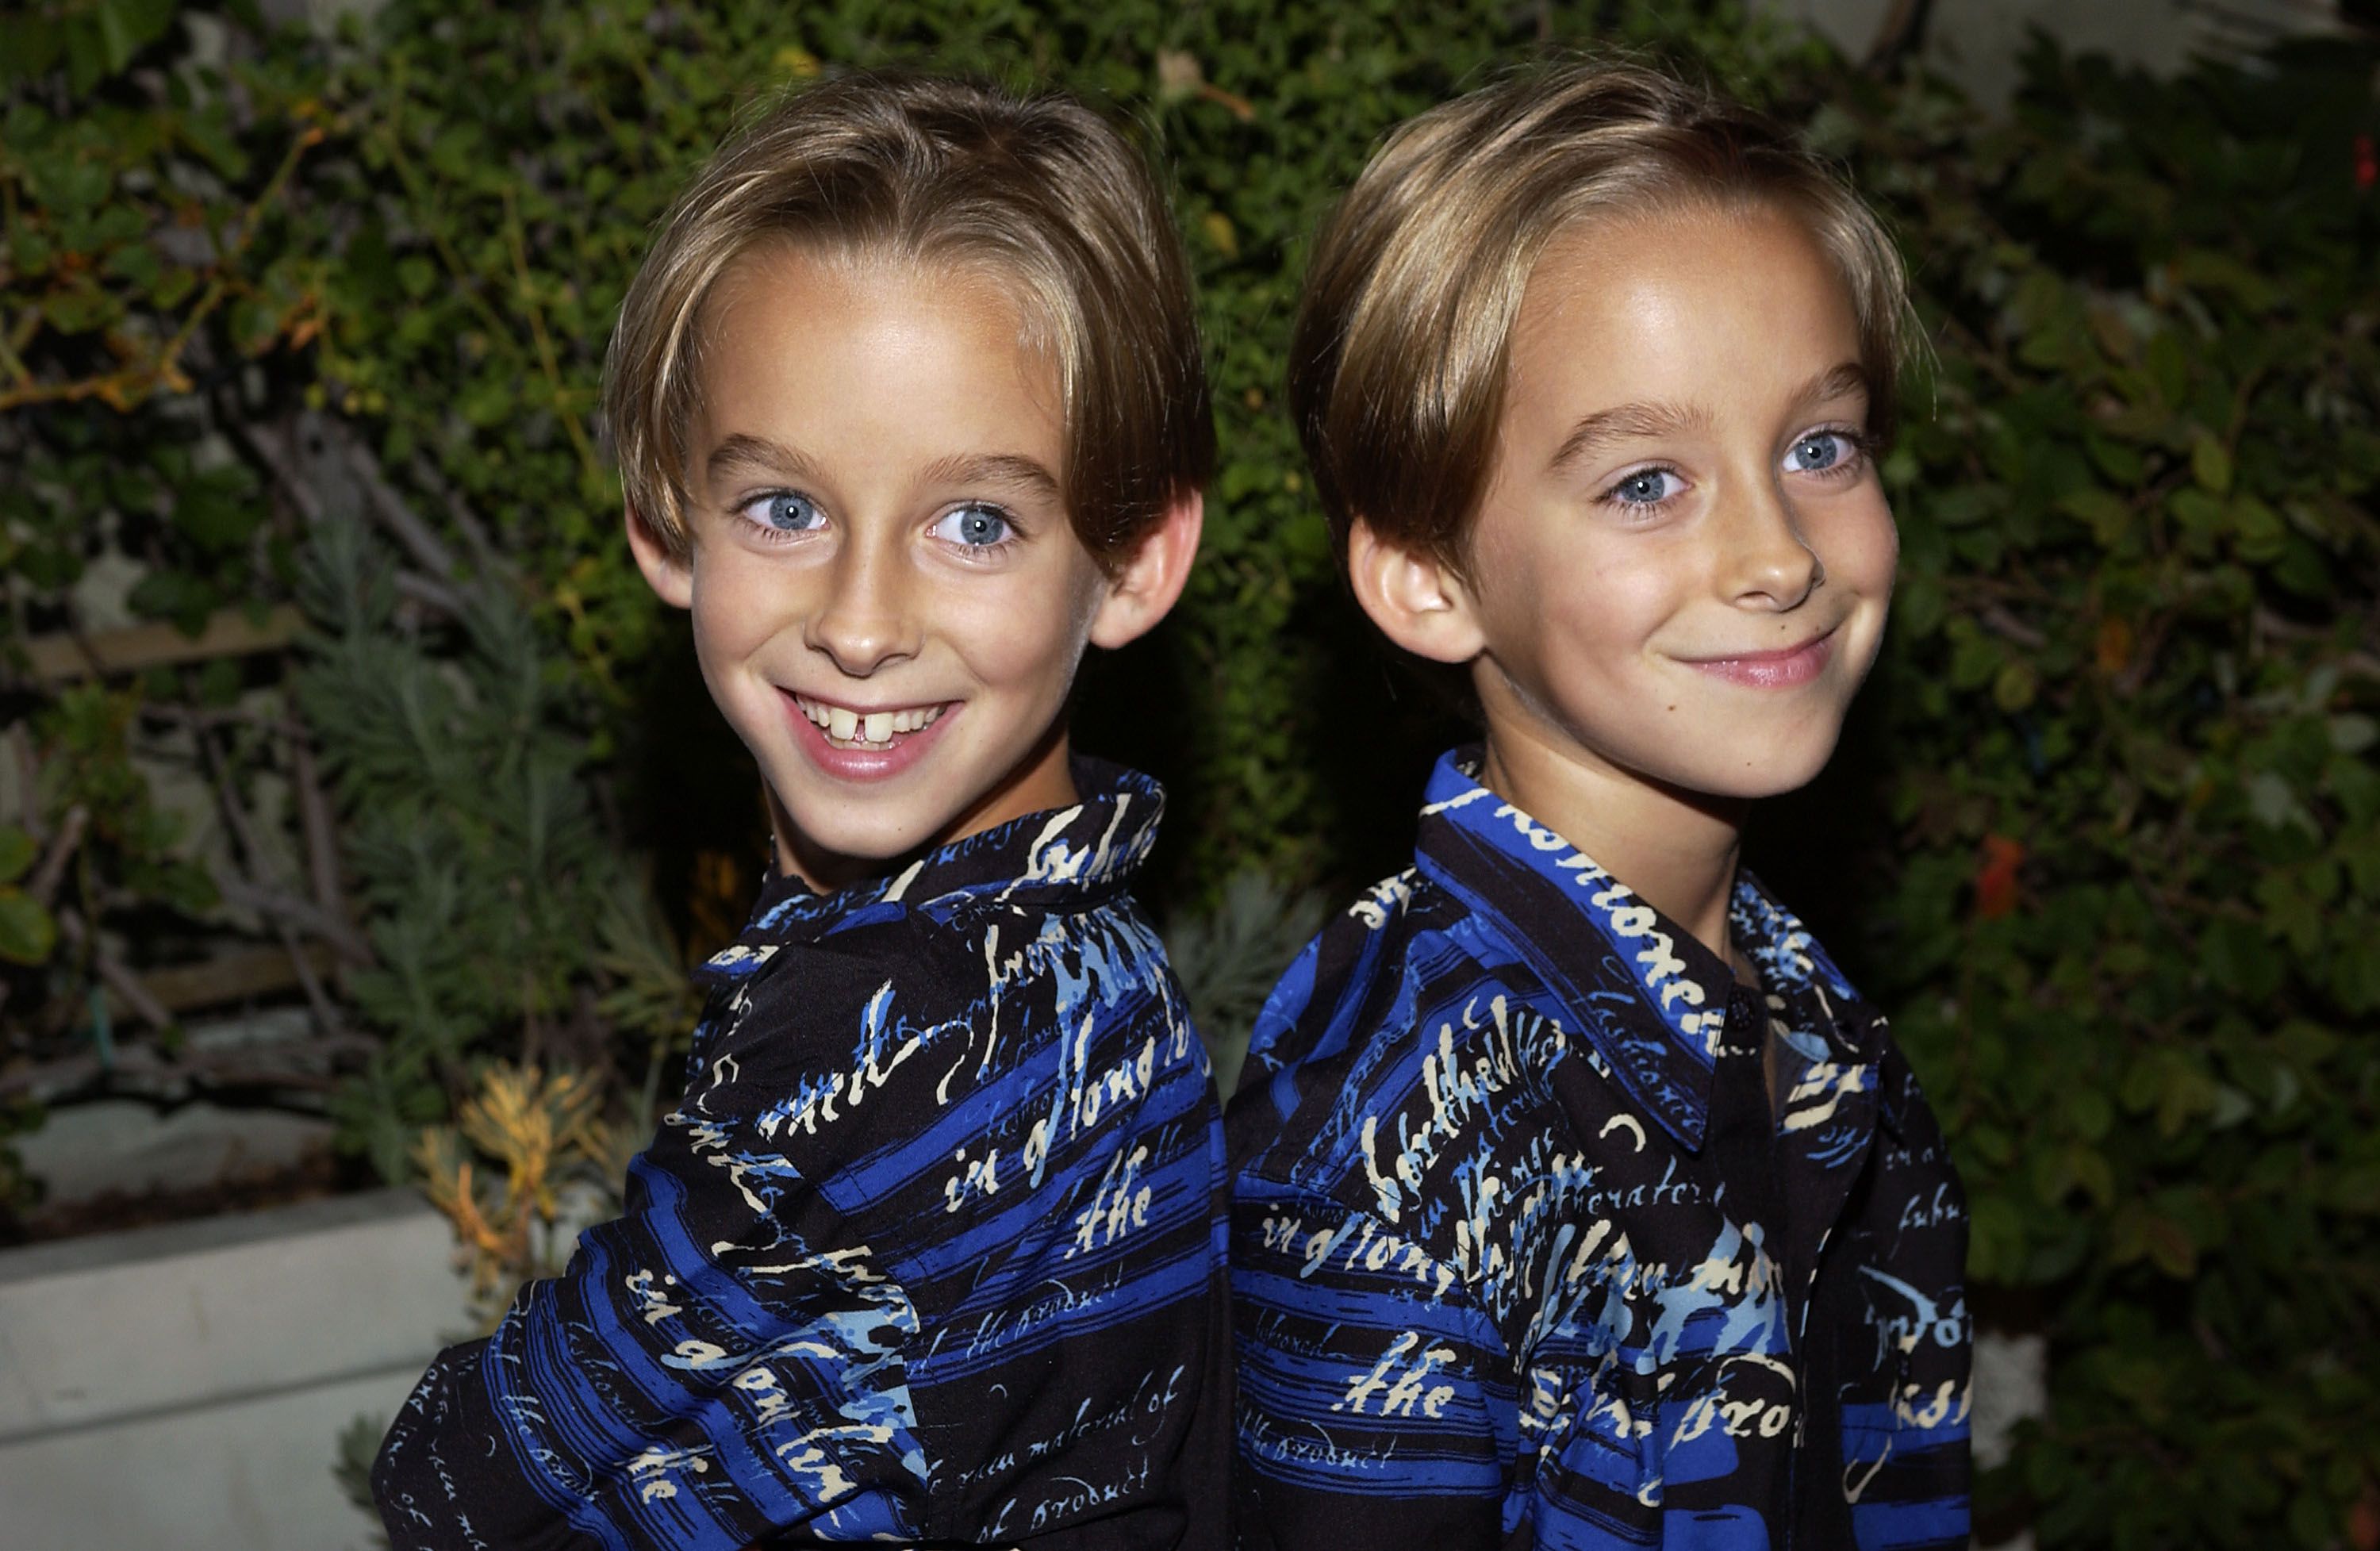 Sawyer and Sullivan Sweeten at the party celebrating the 200th Episode of "Everybody Loves Raymond" on October 14, 2004, at Spago in Beverly Hills, California | Photo: Amanda Edwards/Getty Images